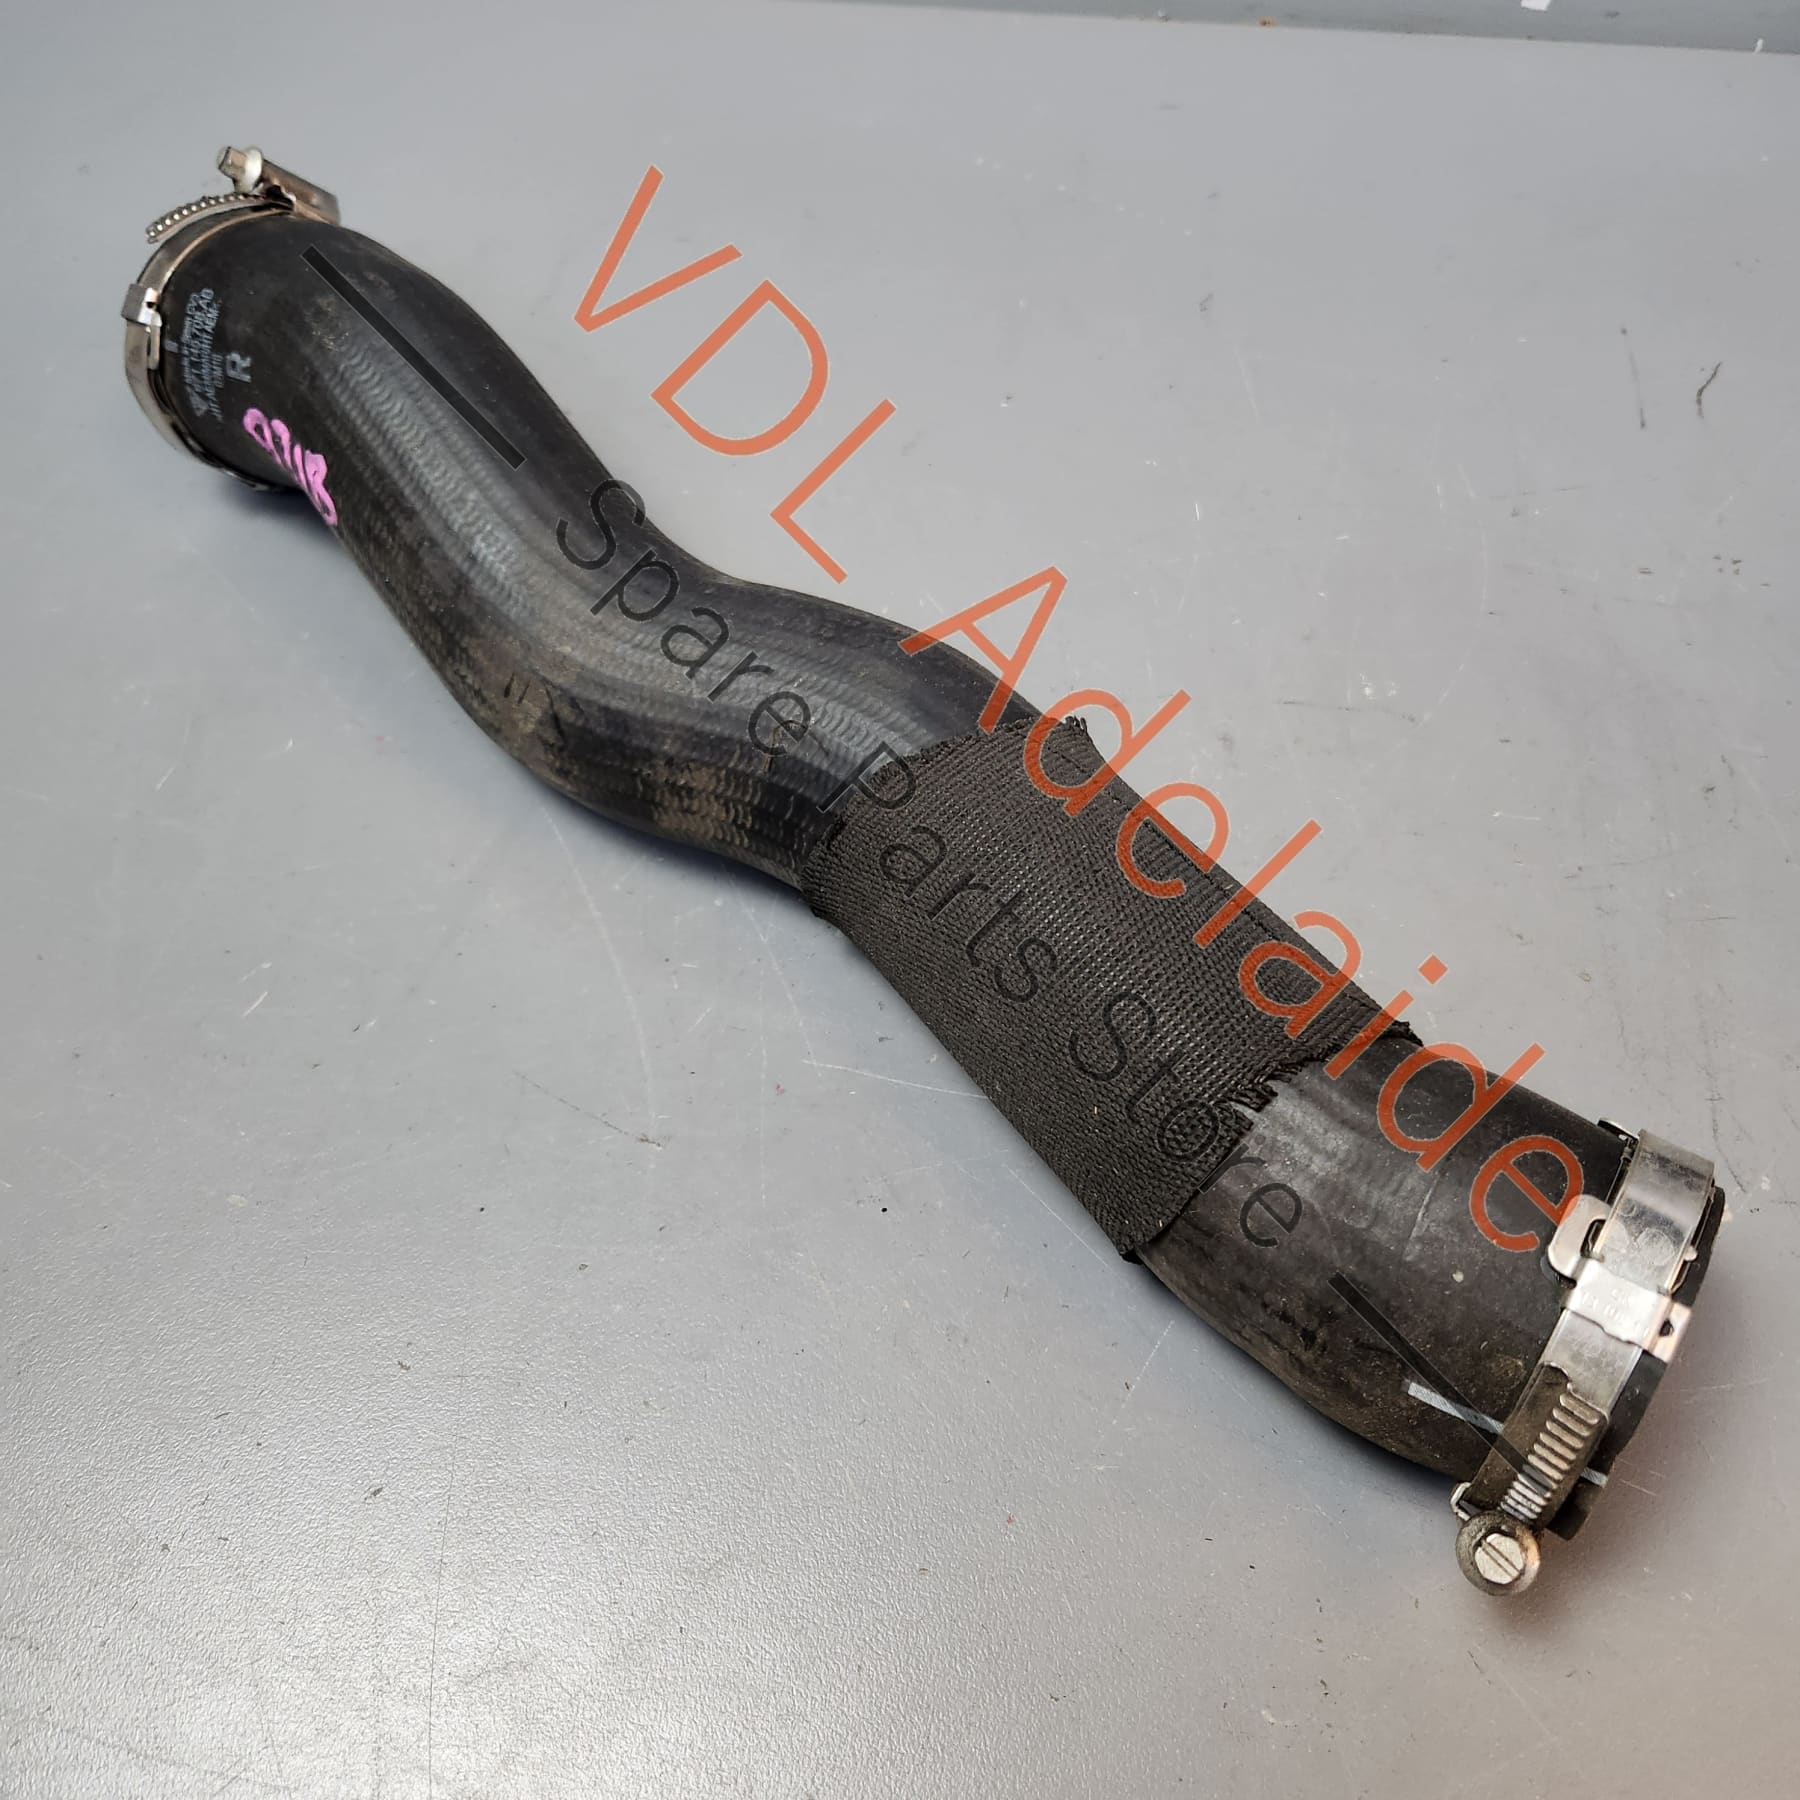 Porsche Panamera 971 Charge Air Cooler Pipe Hose Right Upper 971145708AB 971145708 971145708AB 971145708BK 971145708BK   